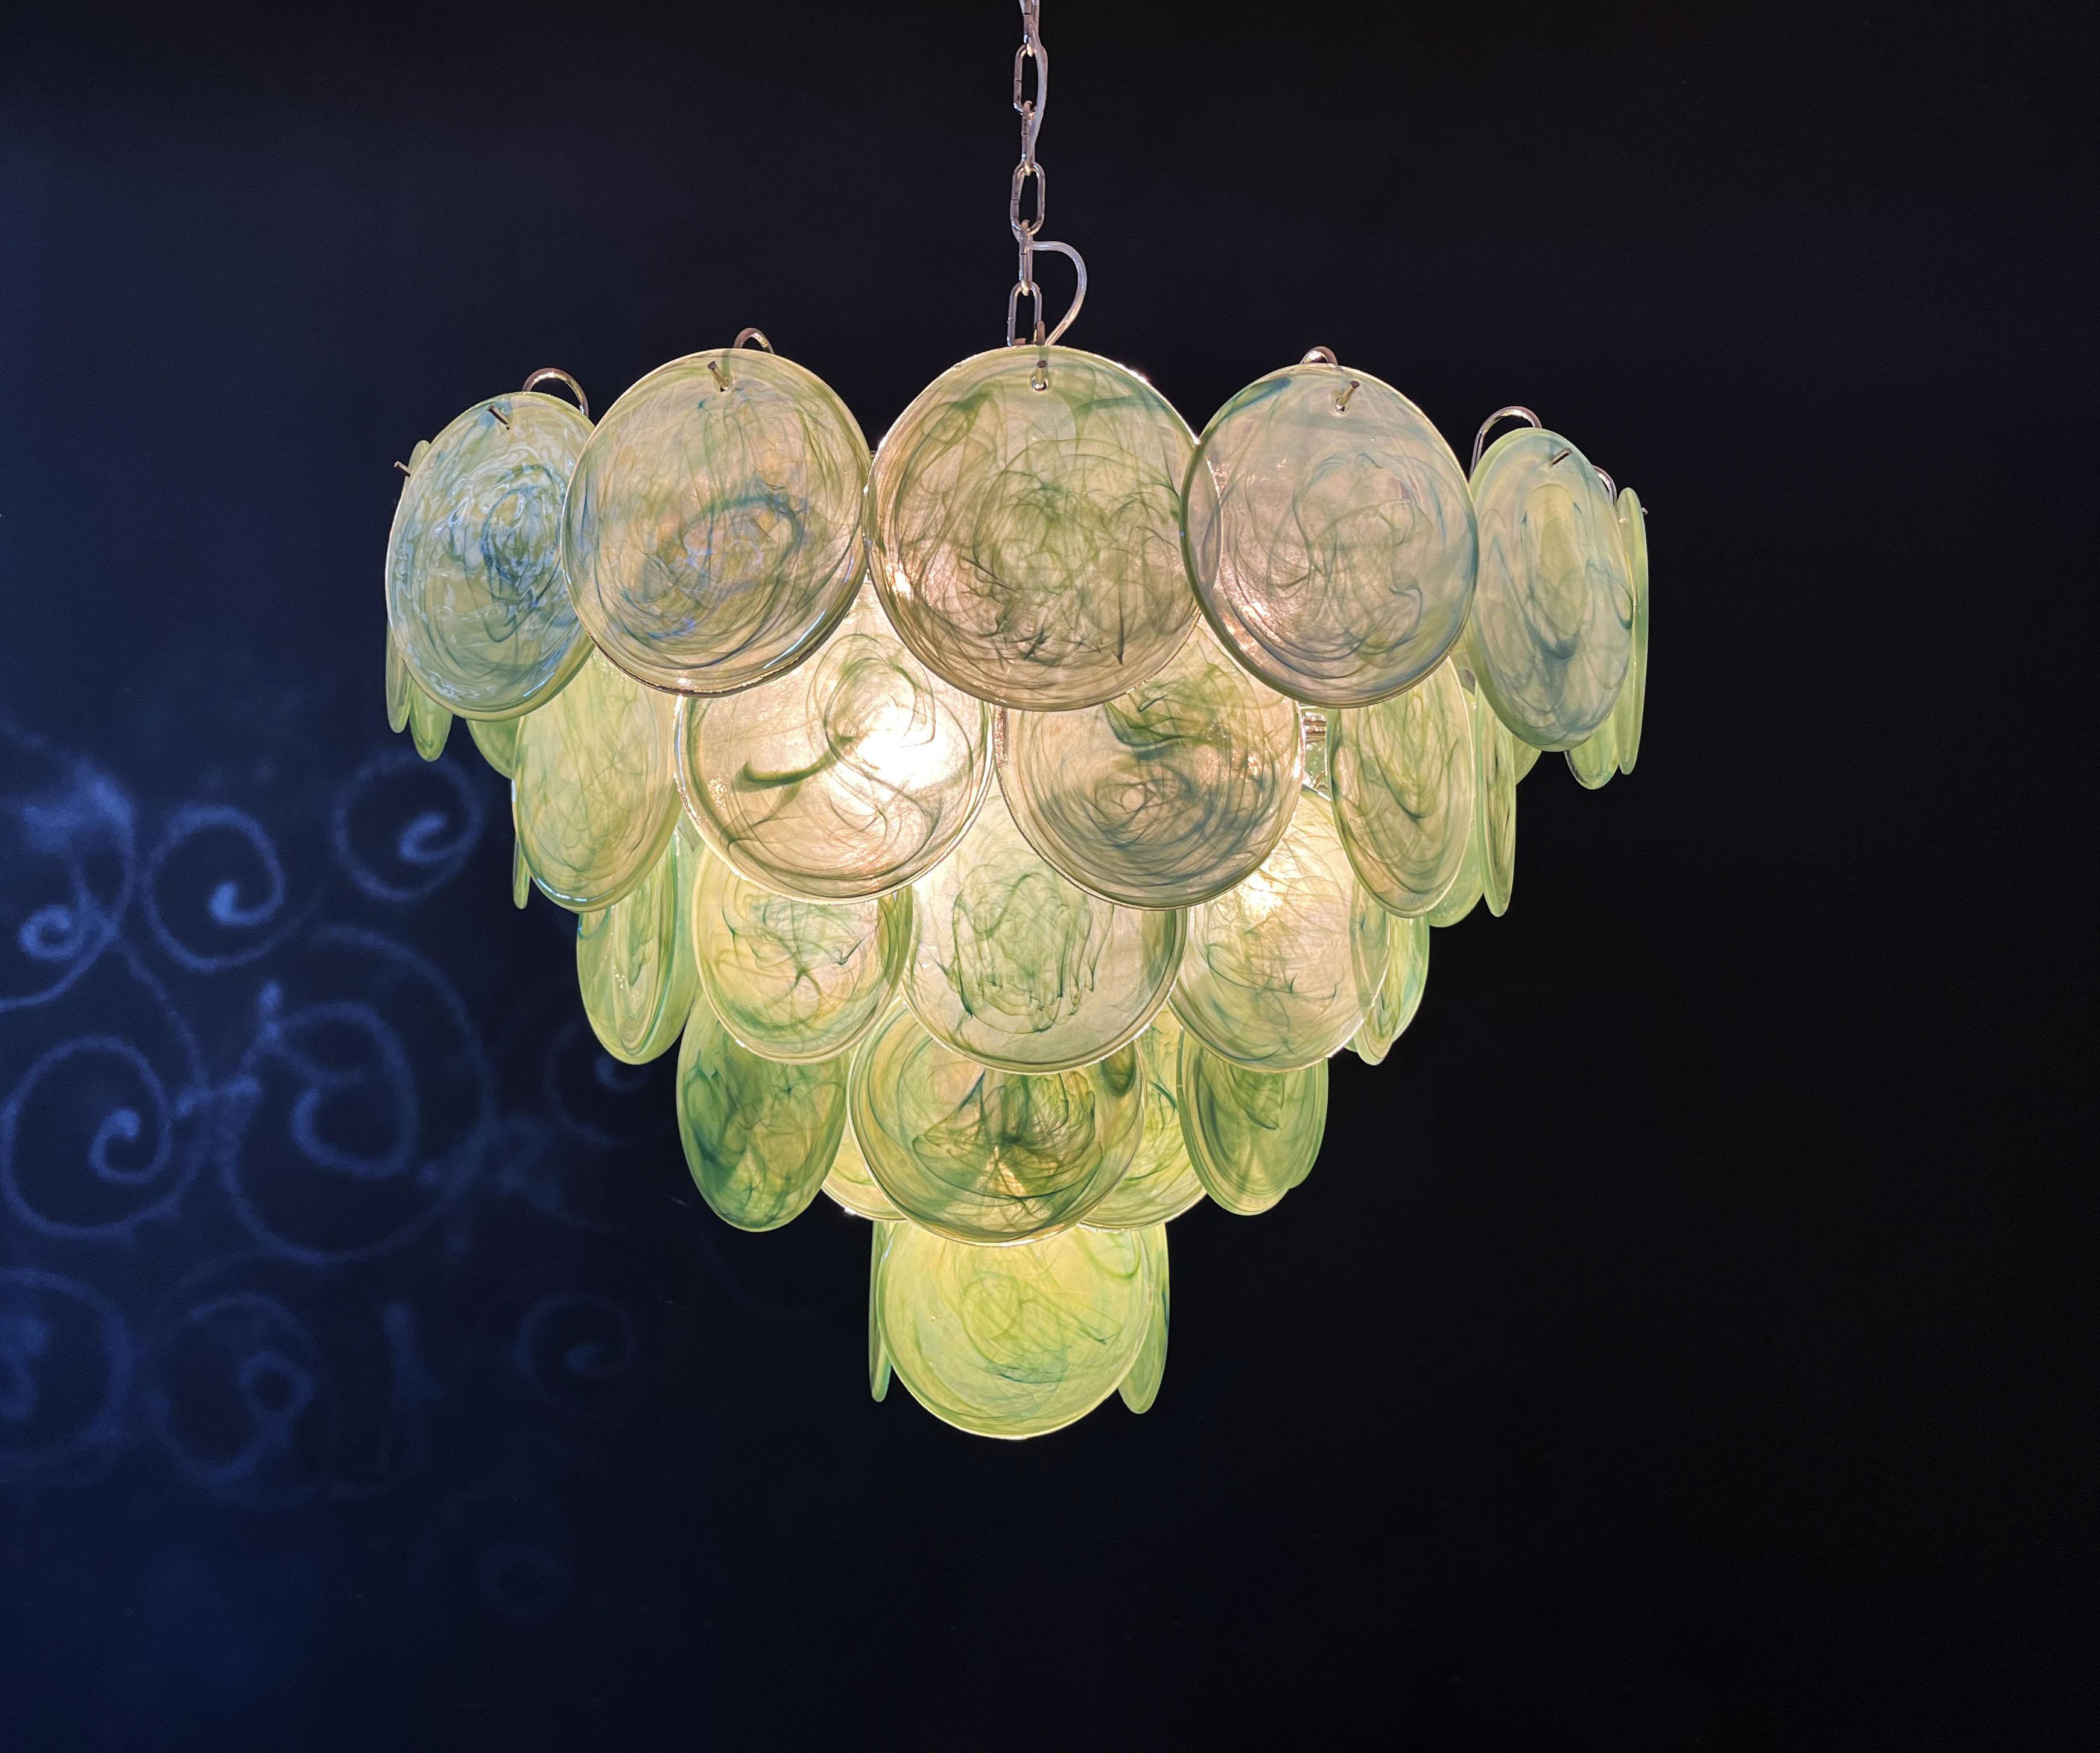 Galvanized High Quality Murano Chandelier Space Age, 57 Green Albaster Iridescent Glasses For Sale